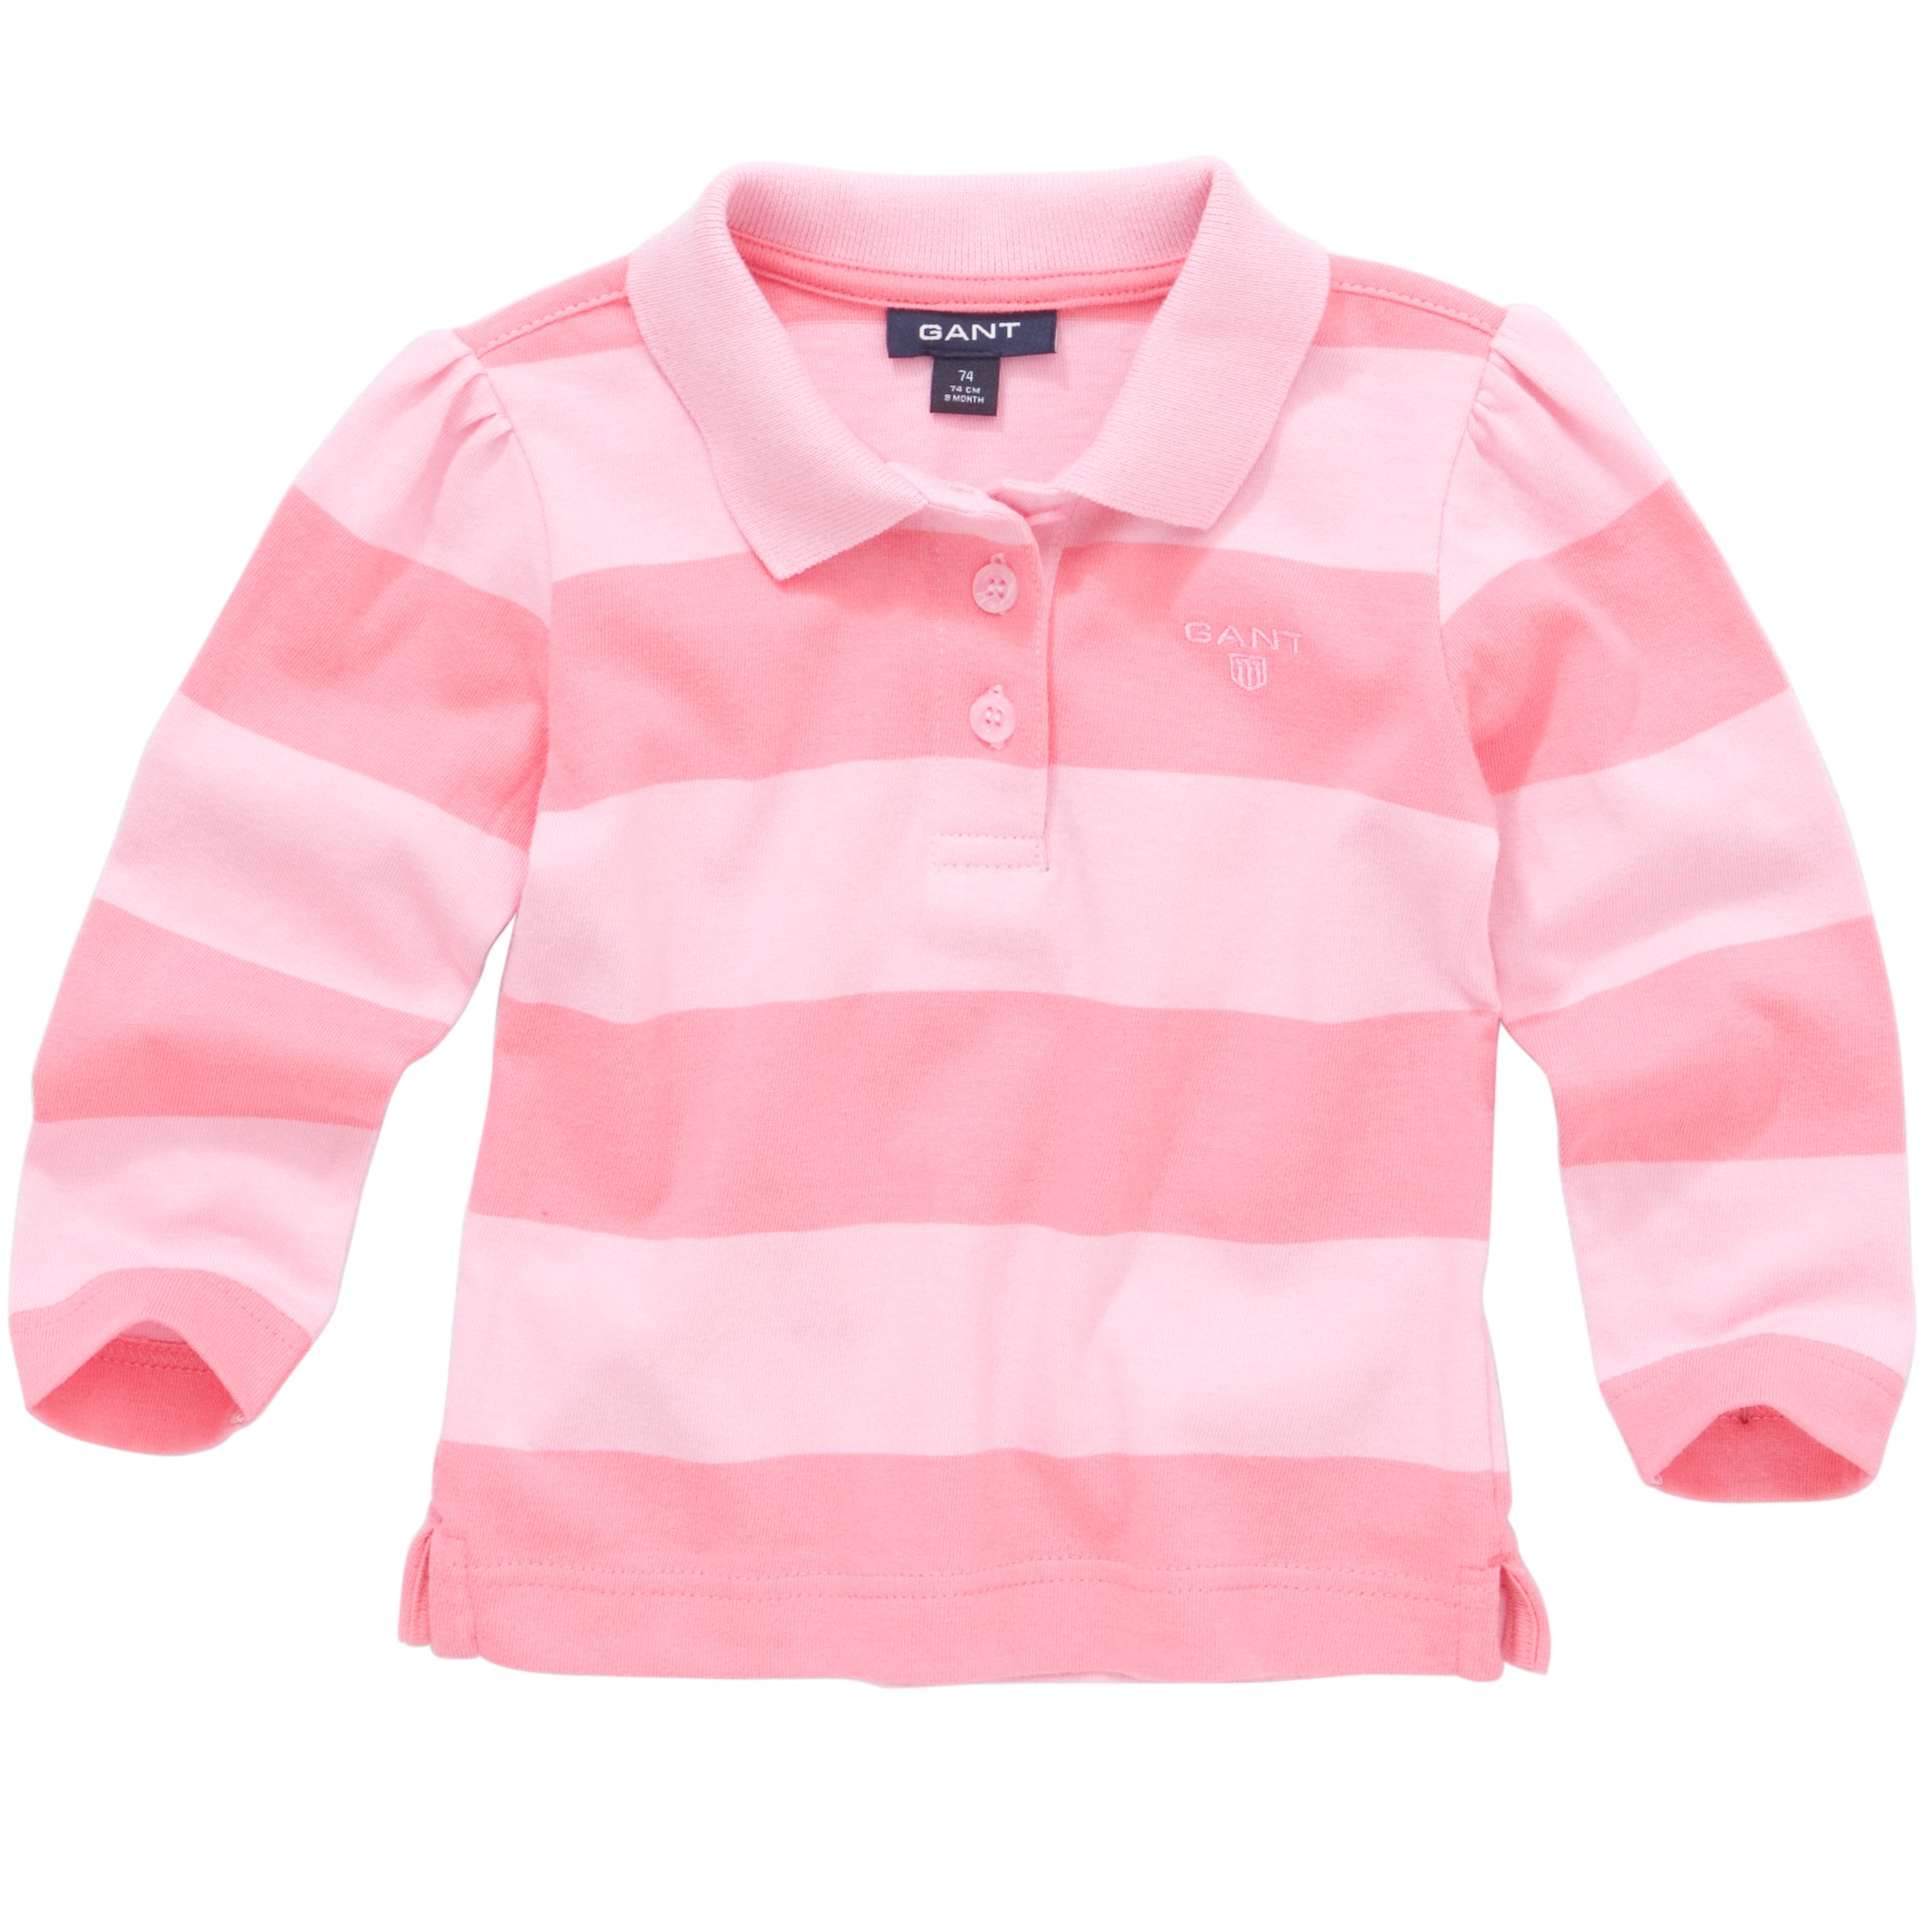 Bold Stripe Long Sleeve Rugby Shirt, Pink